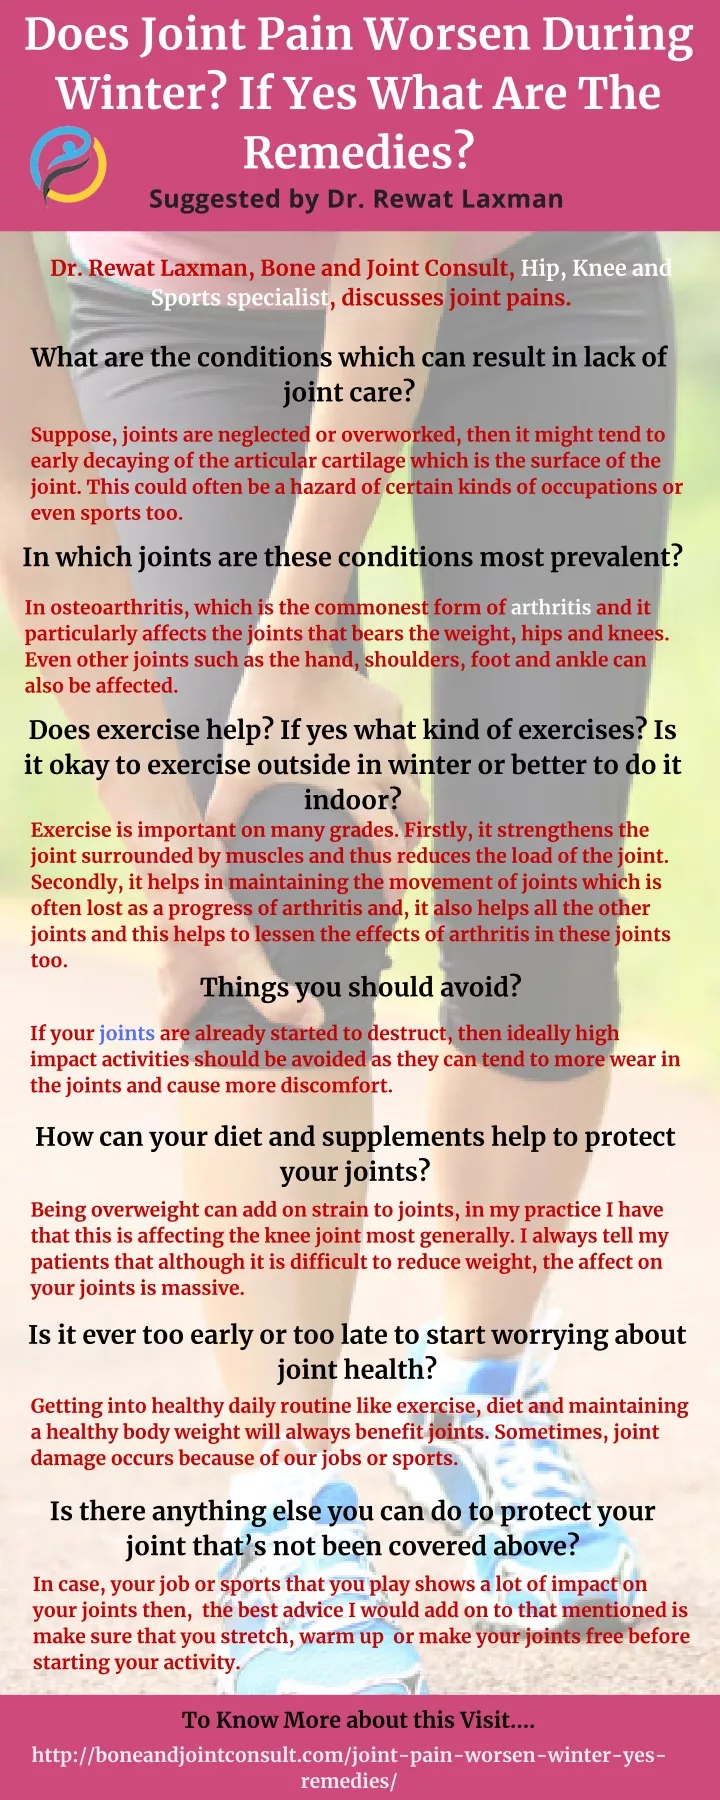 does joint pain worsen during winter if yes what